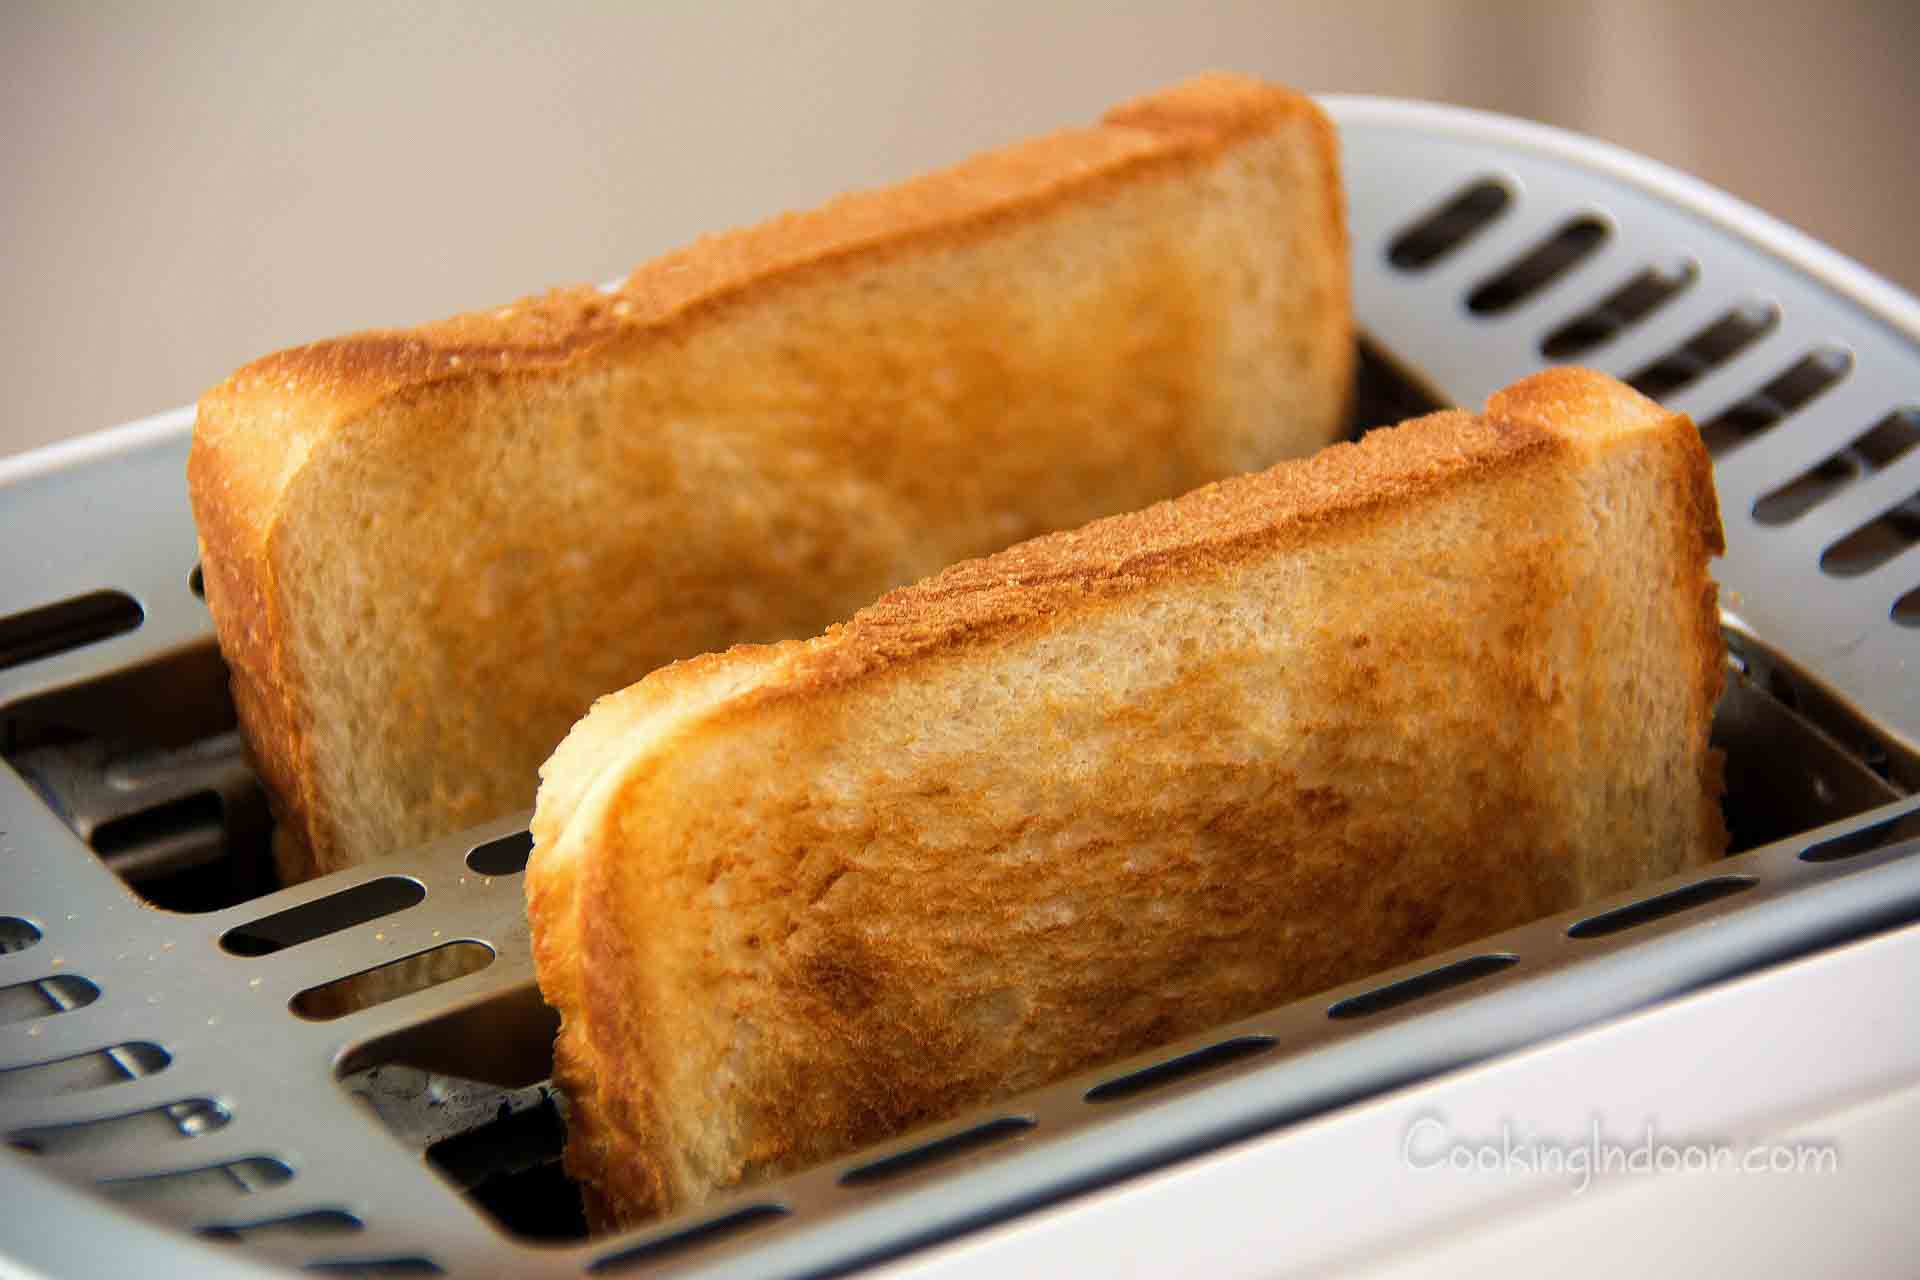 How hot does a toaster get